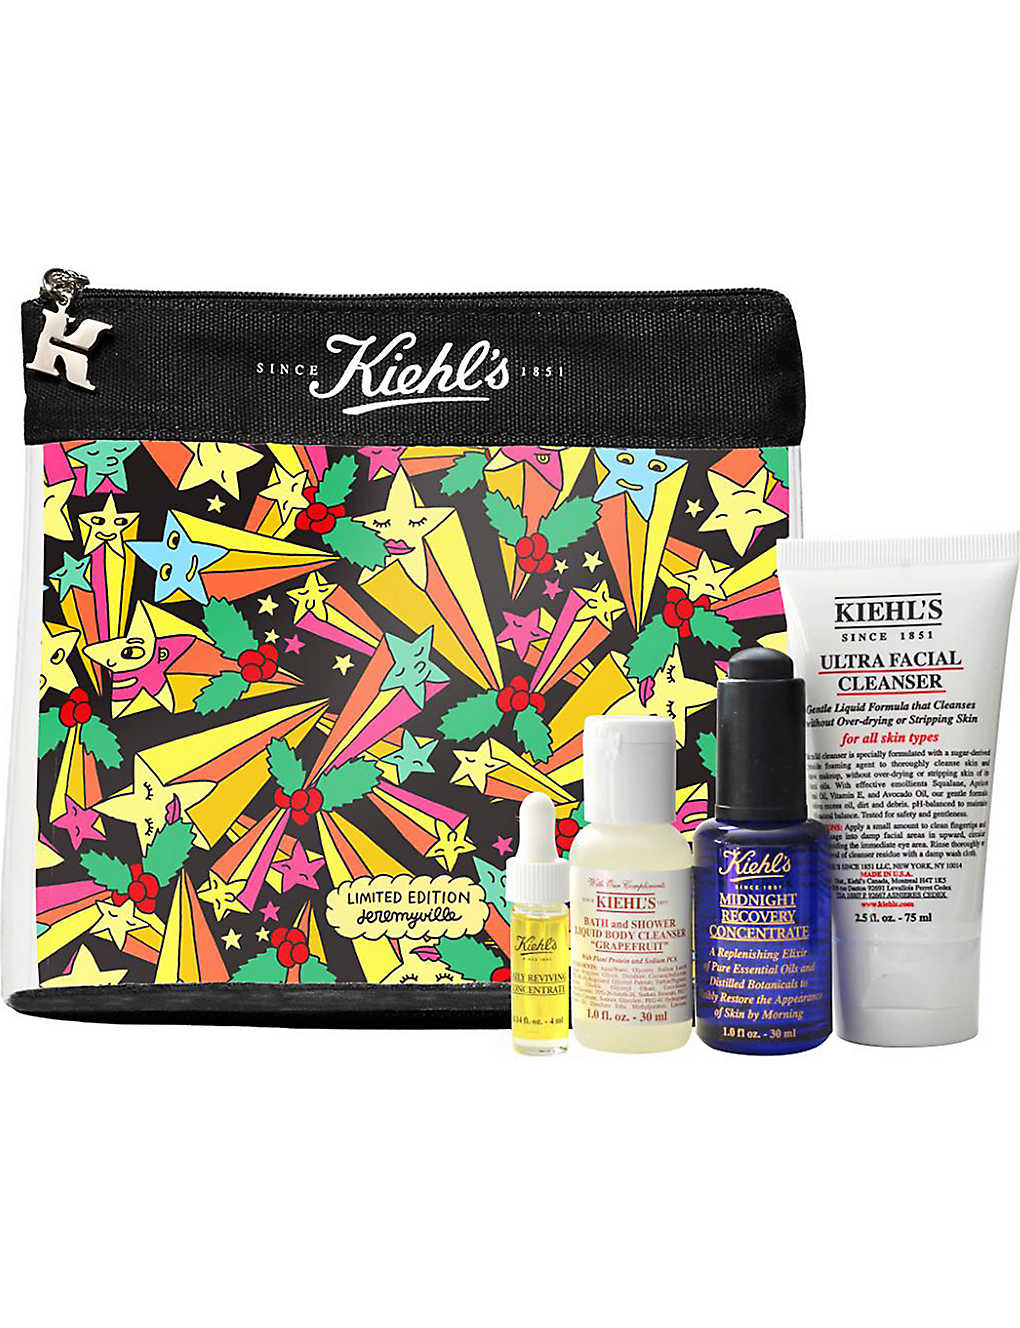 KIEHL'S Limited edition skincare gift set